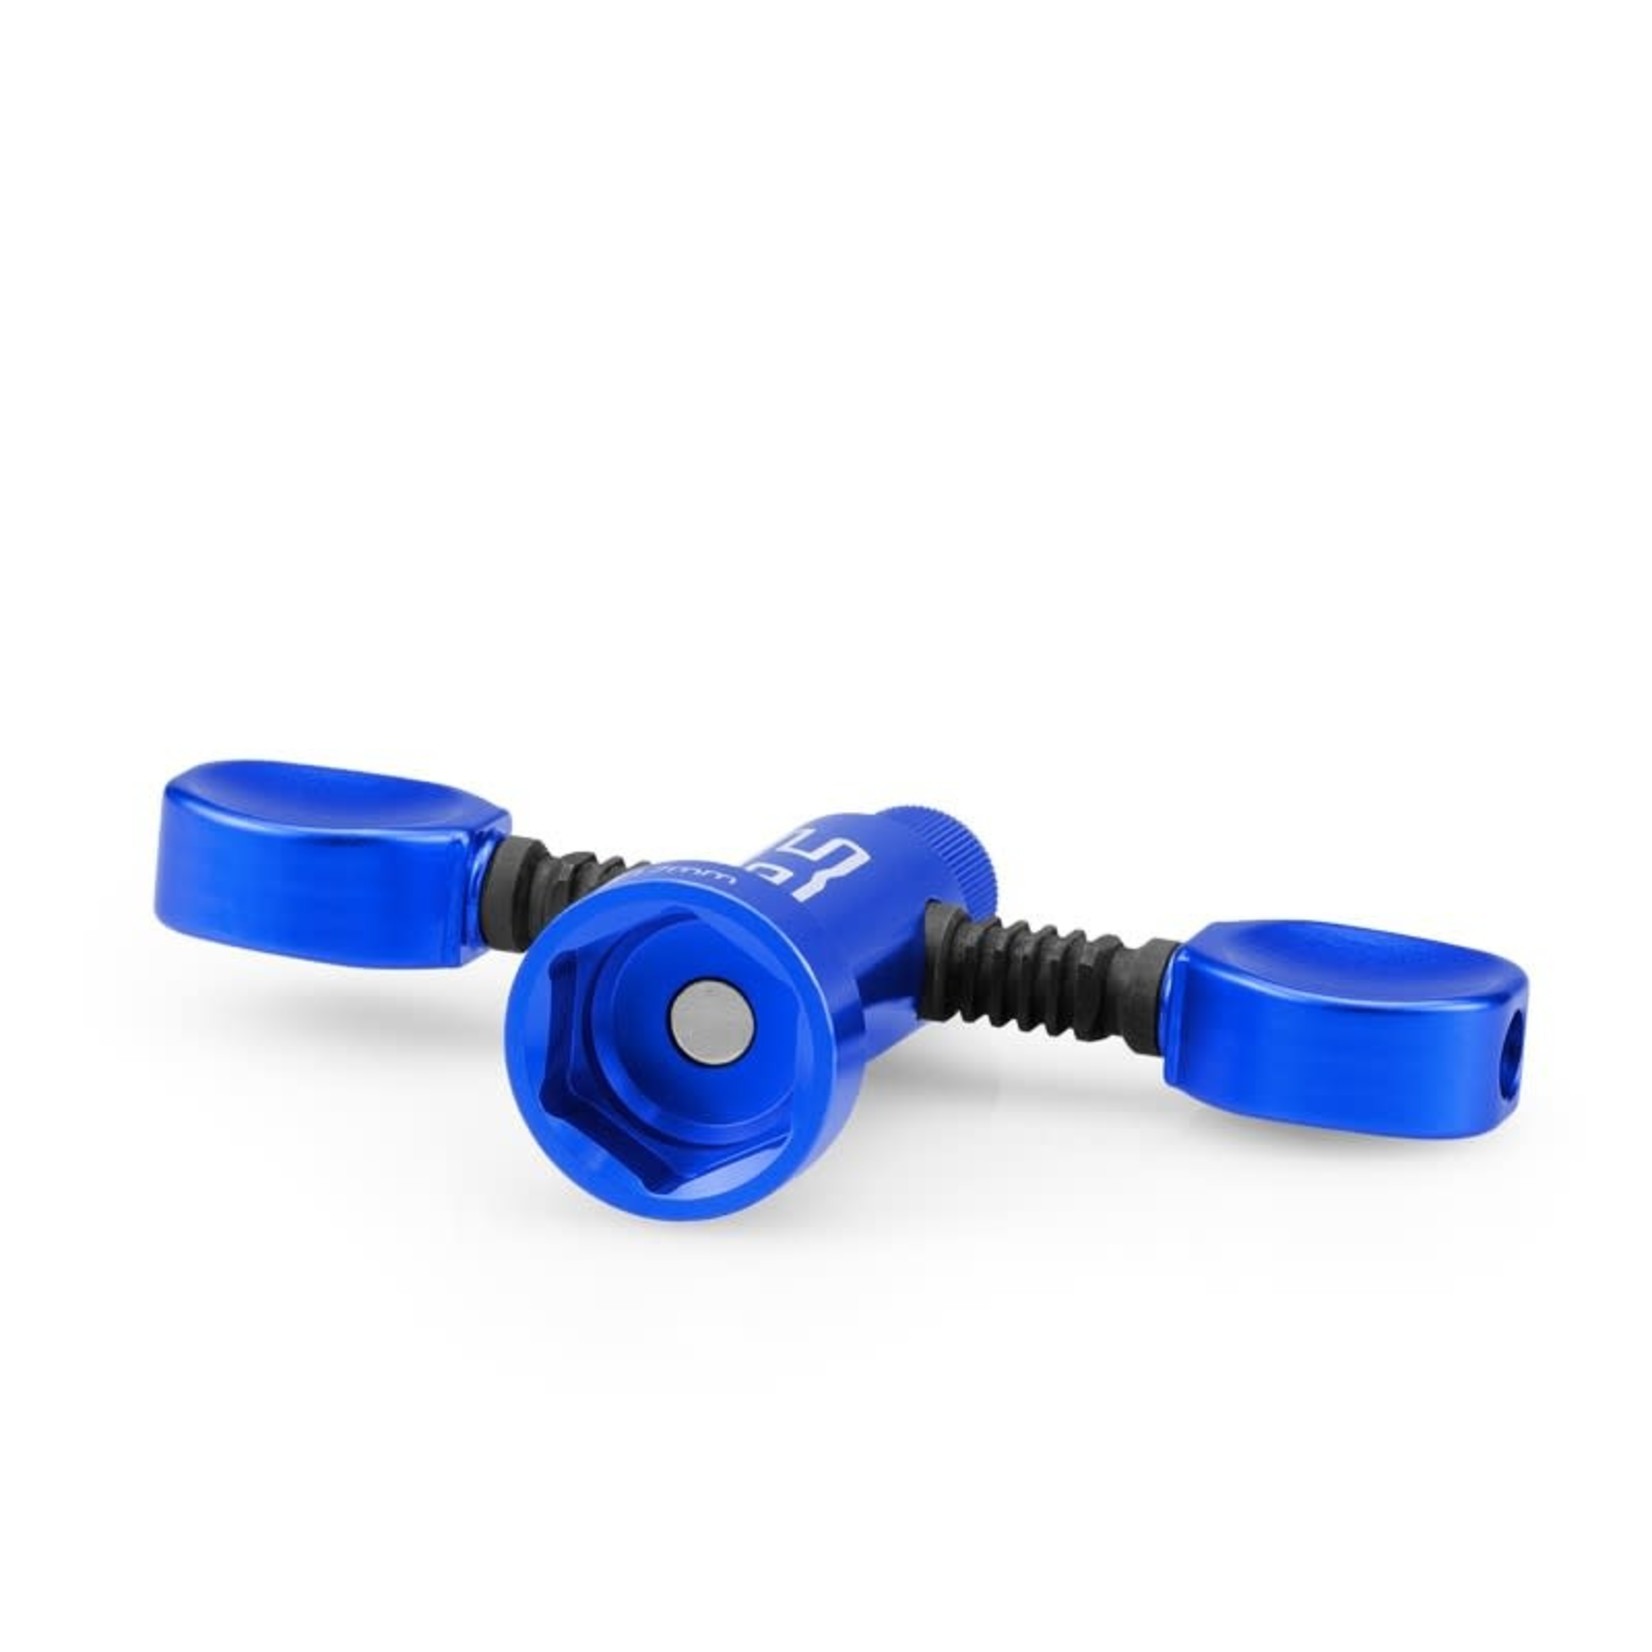 JConcepts JConcepts 17mm Finnisher Magnetic T-Handle Wrench (Blue) #2891-1